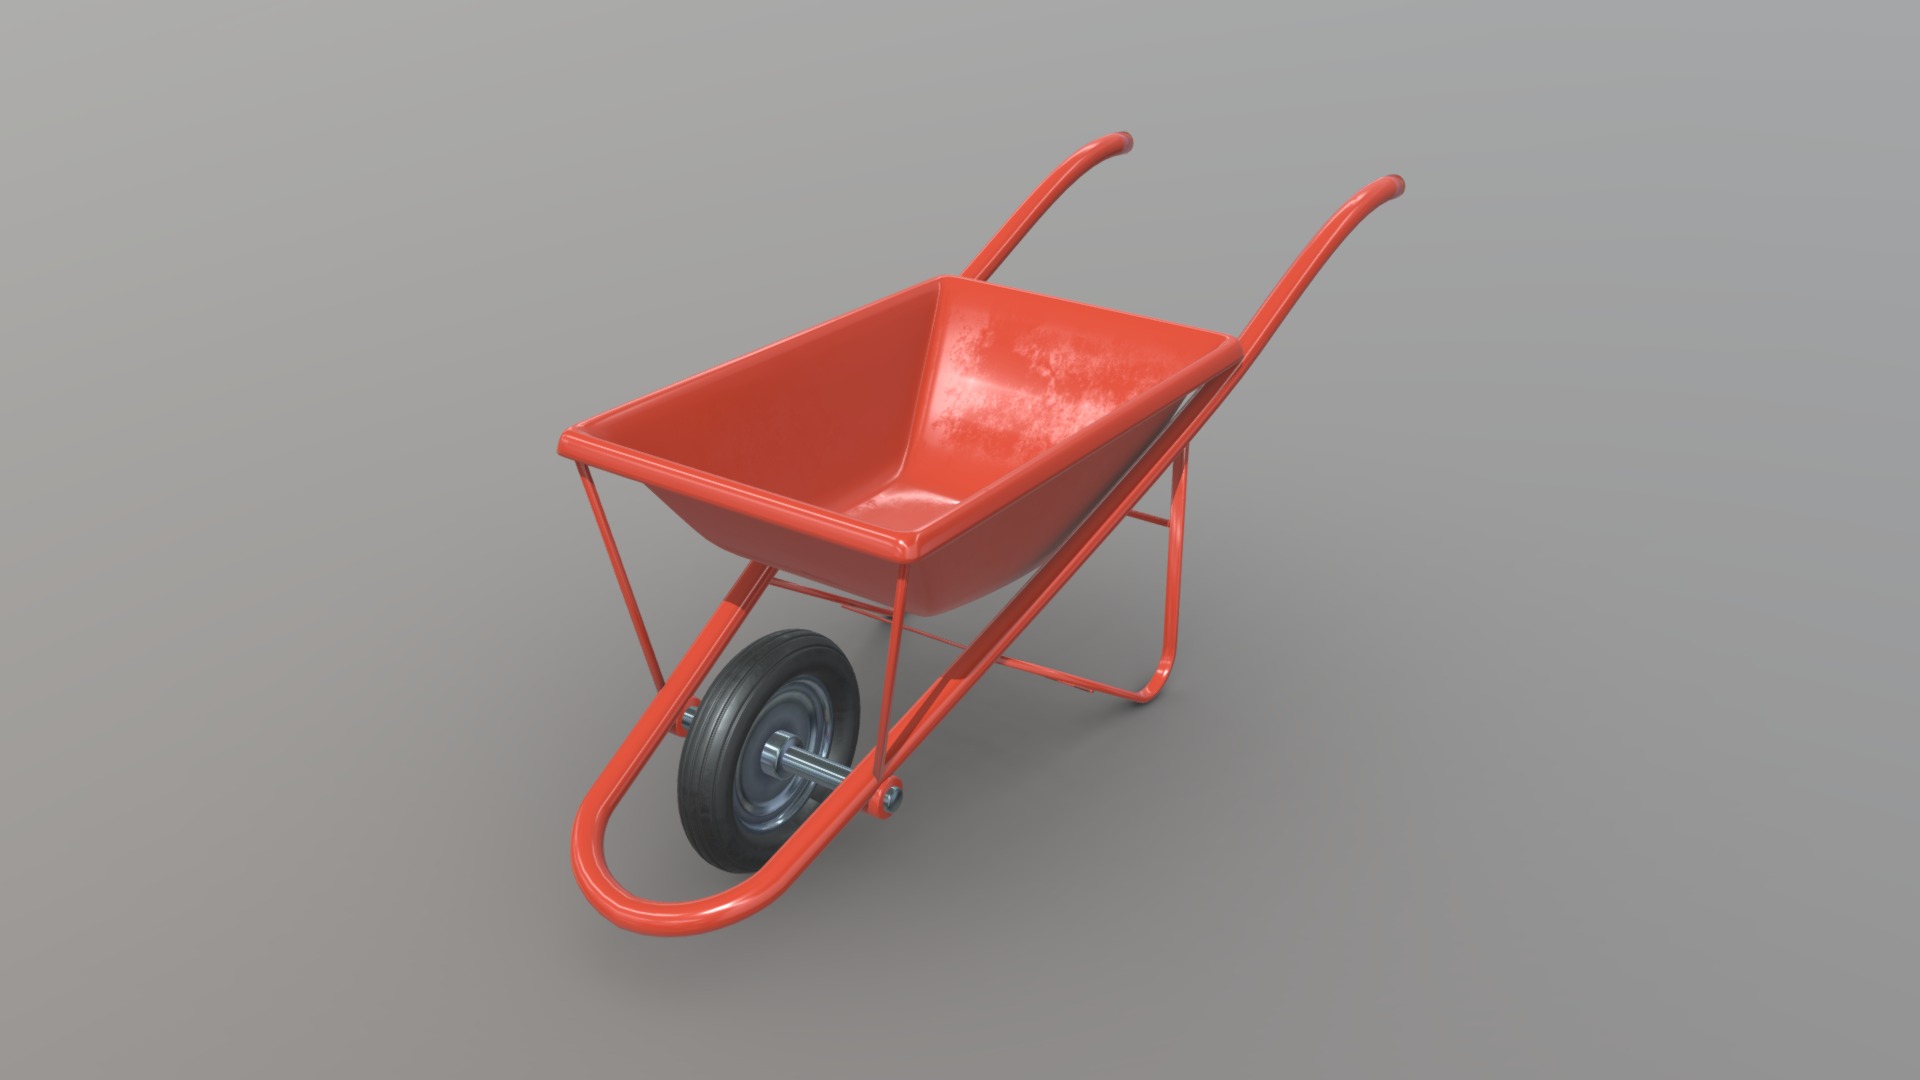 3D model Stroller Clean - This is a 3D model of the Stroller Clean. The 3D model is about a red lawnmower on a white background.